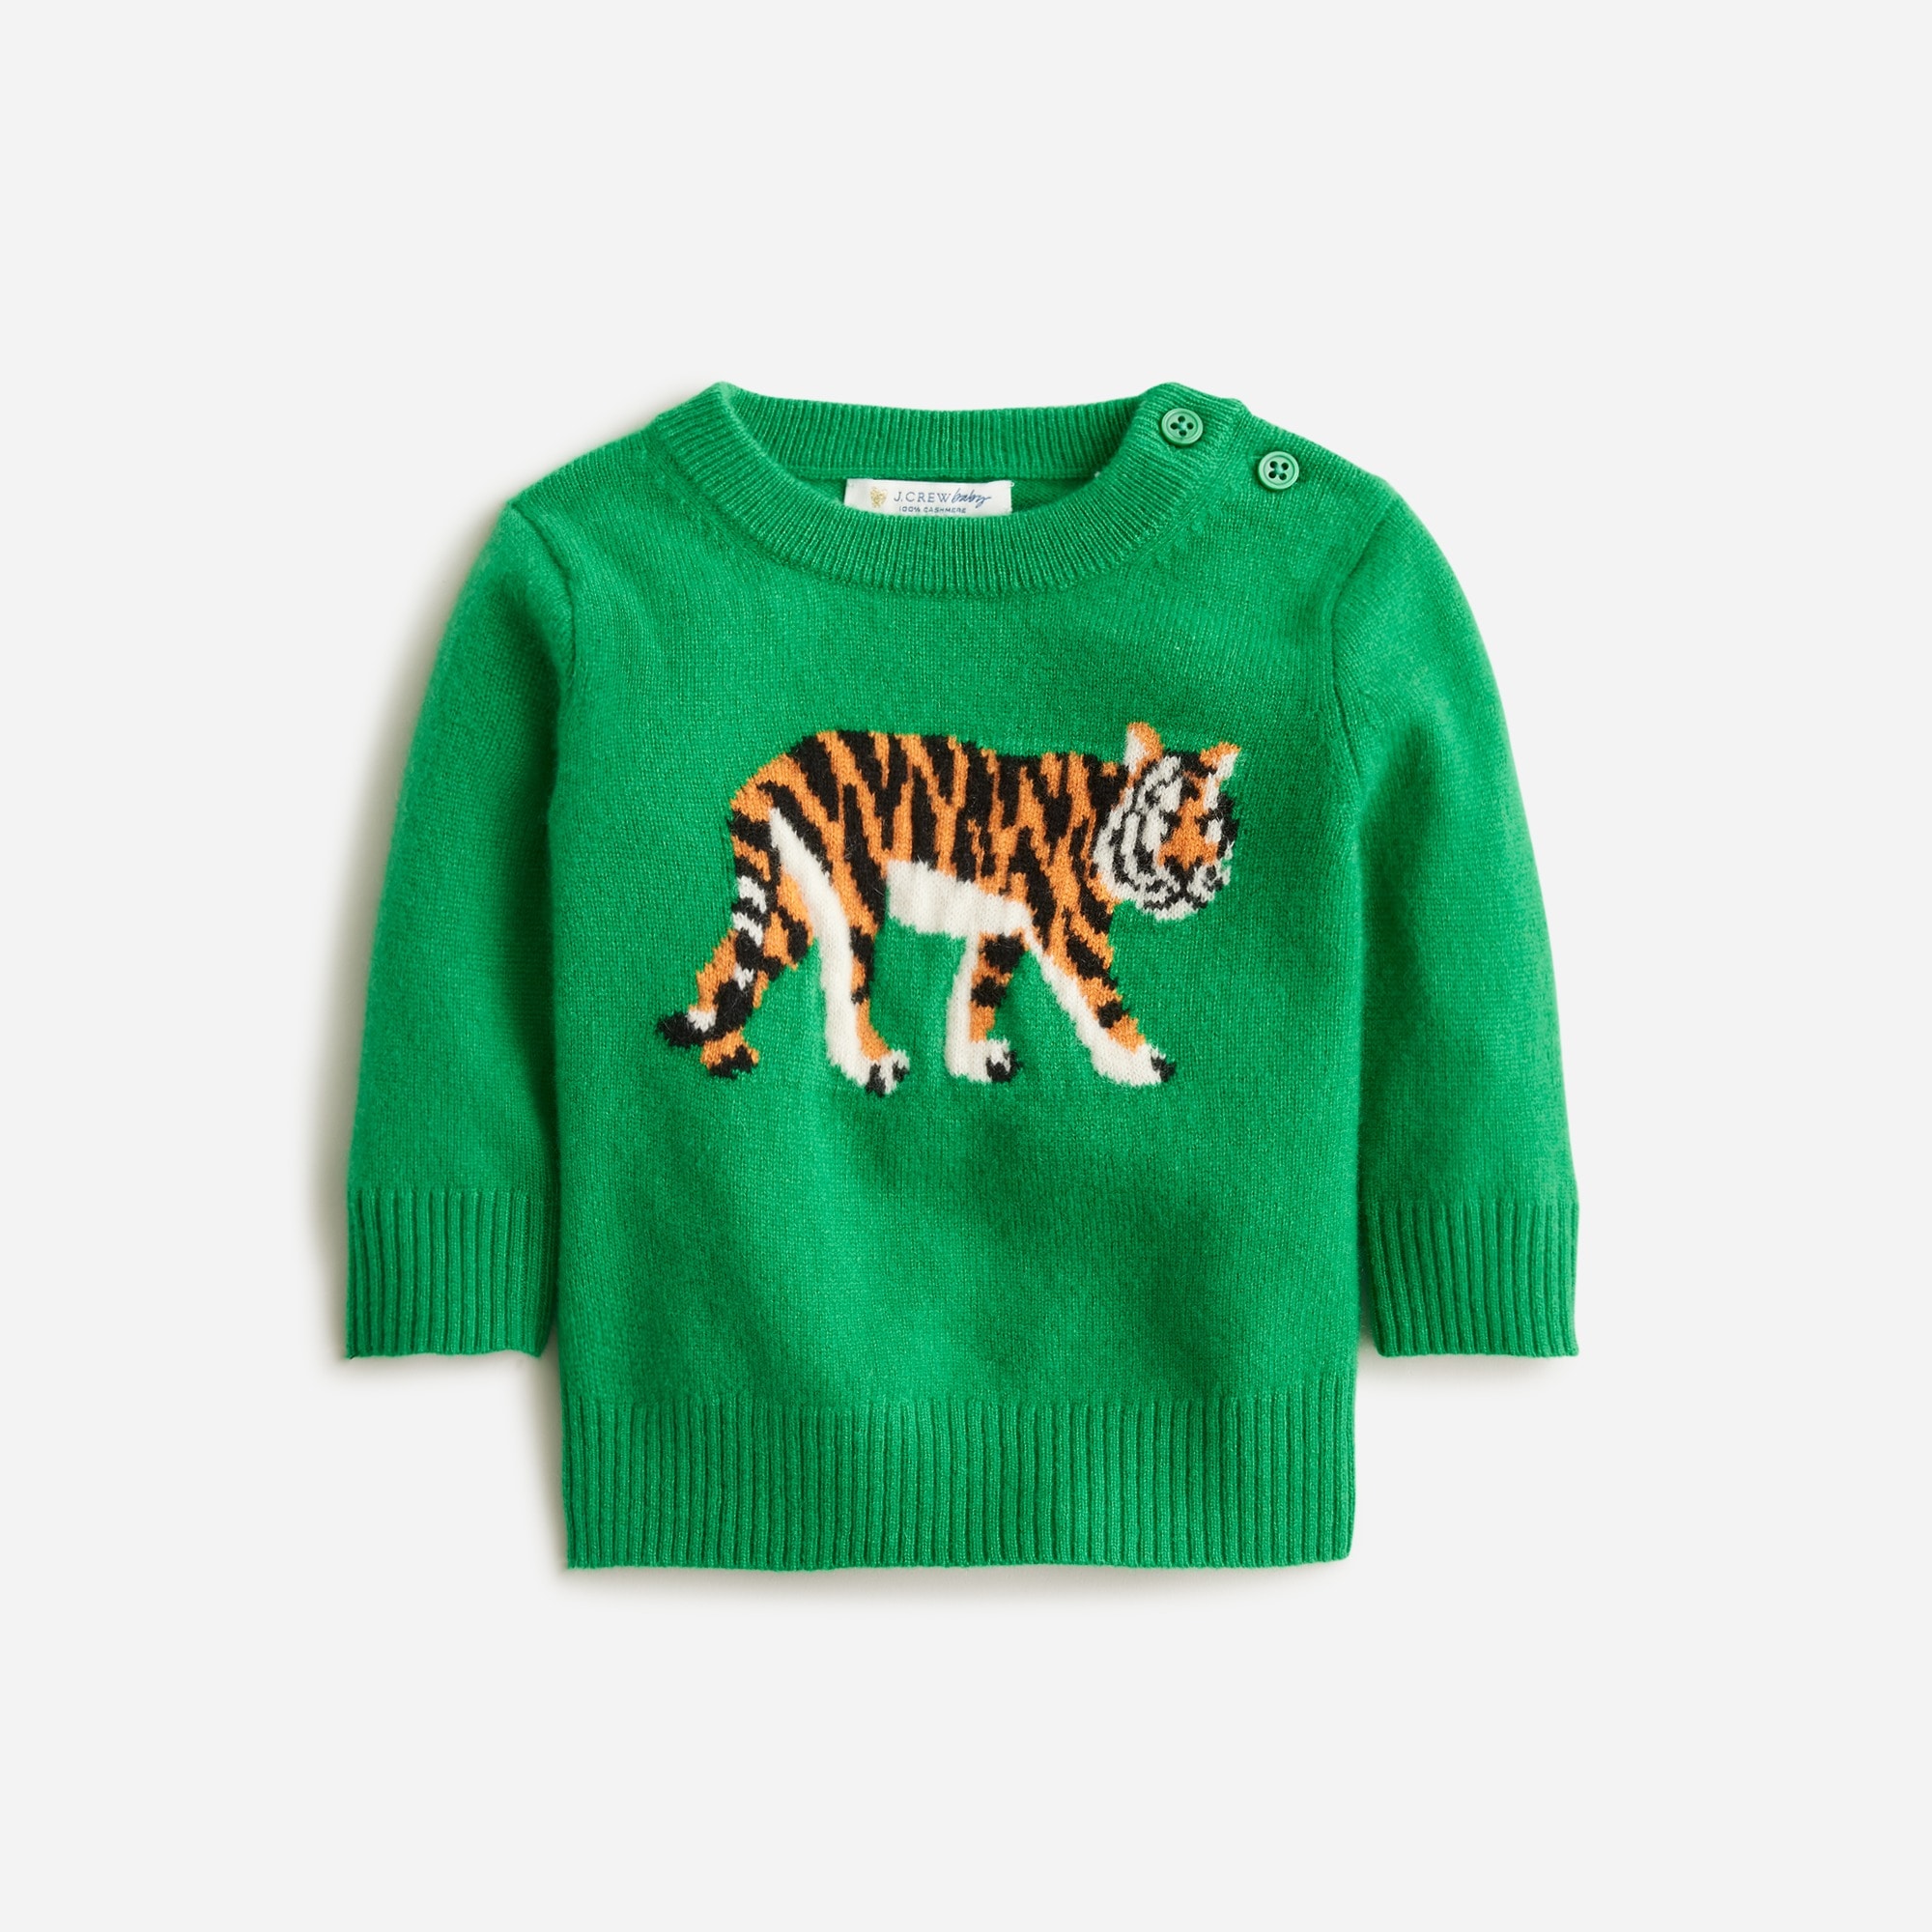  Limited-edition baby cashmere crewneck sweater